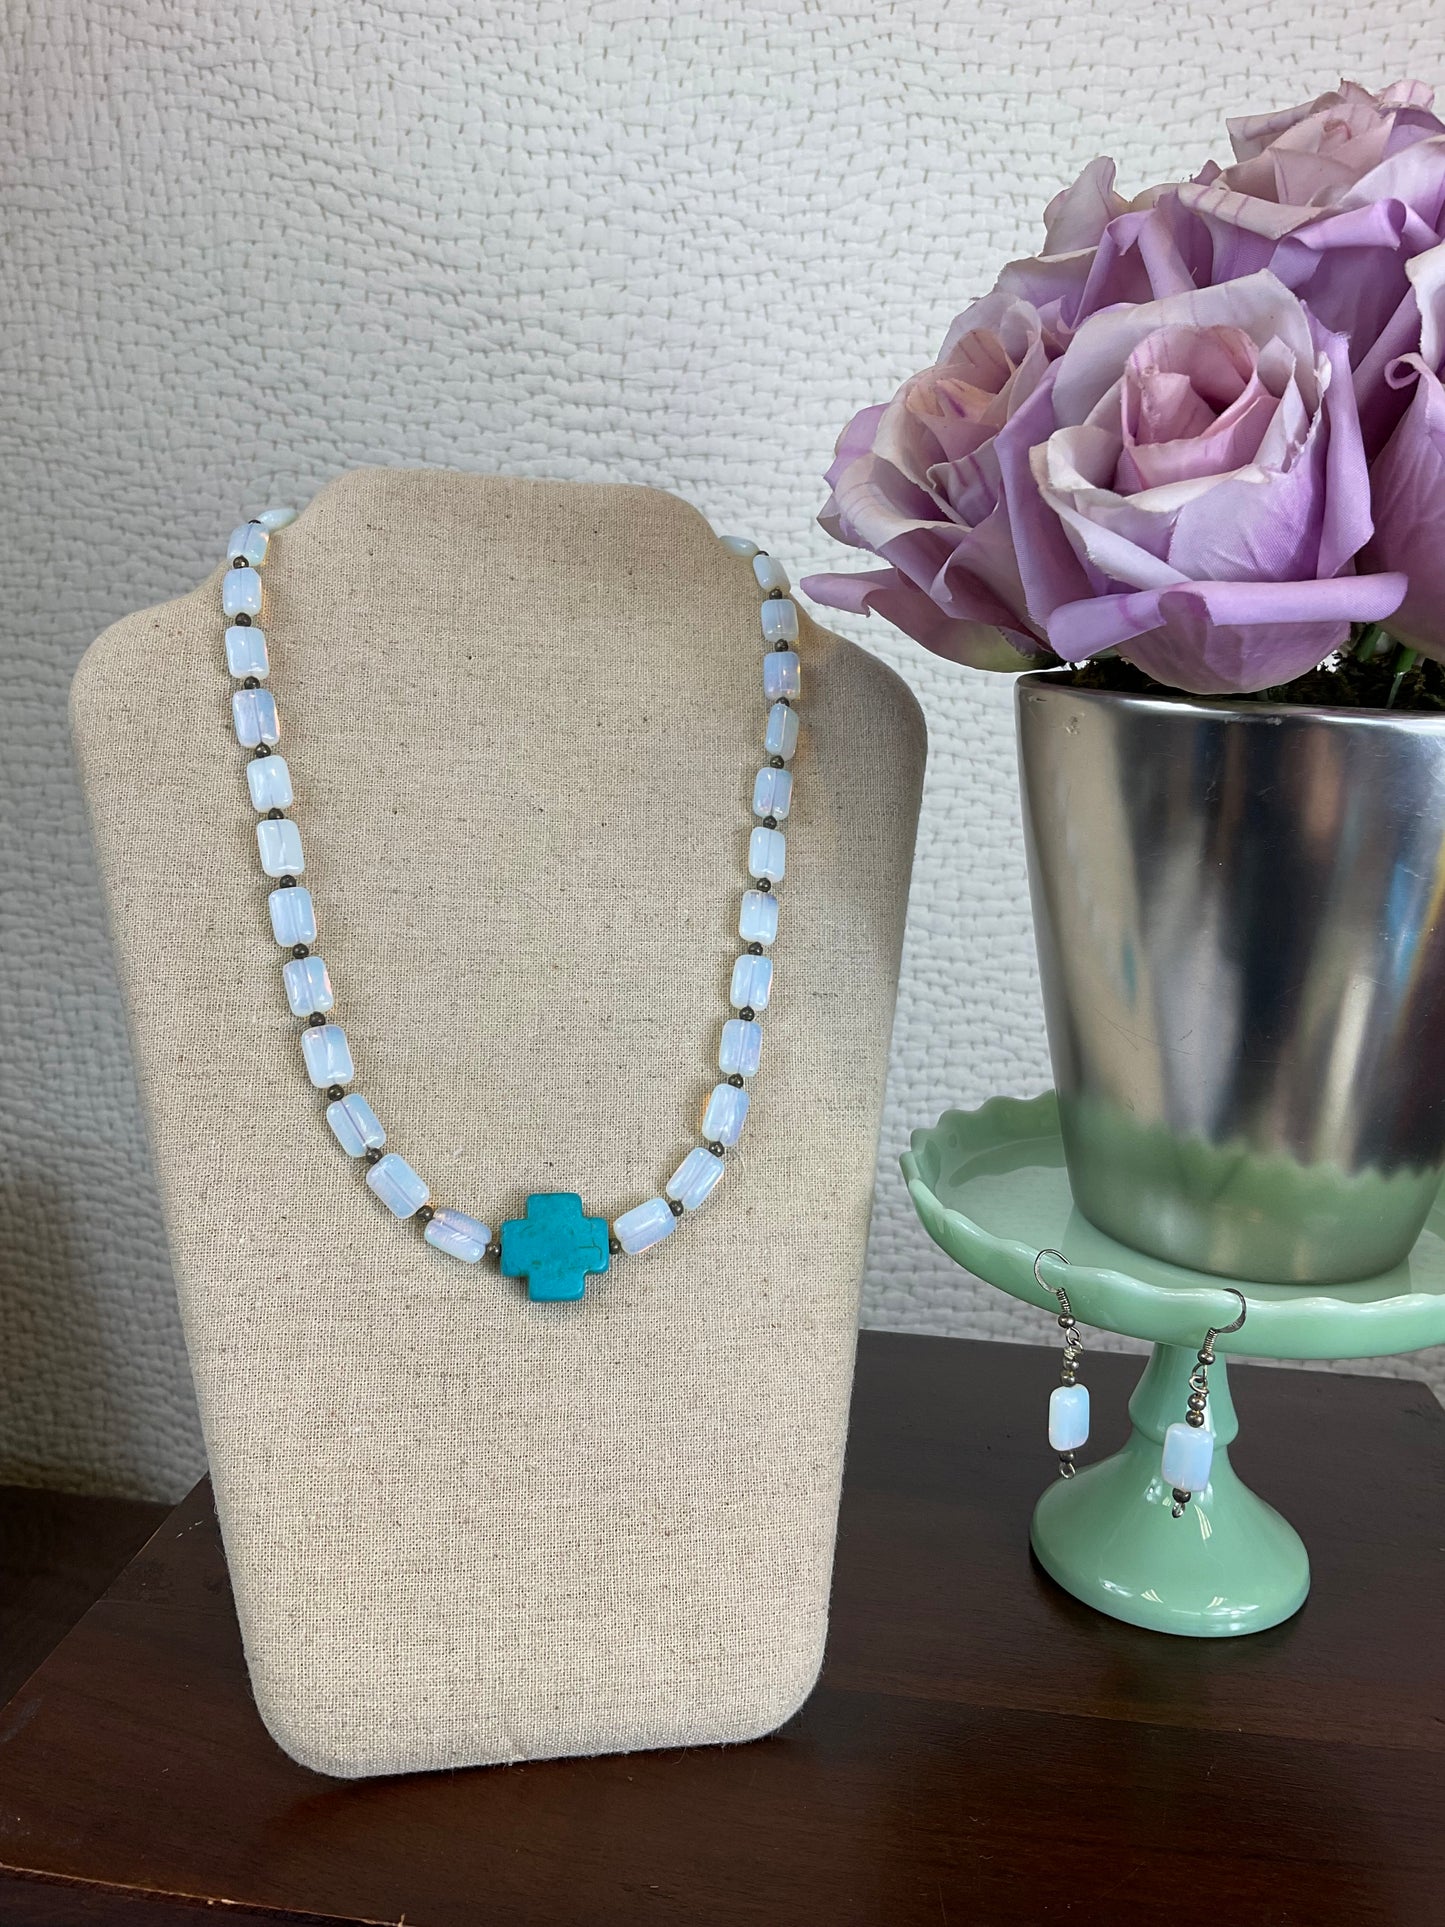 Beaded Necklace with Earrings